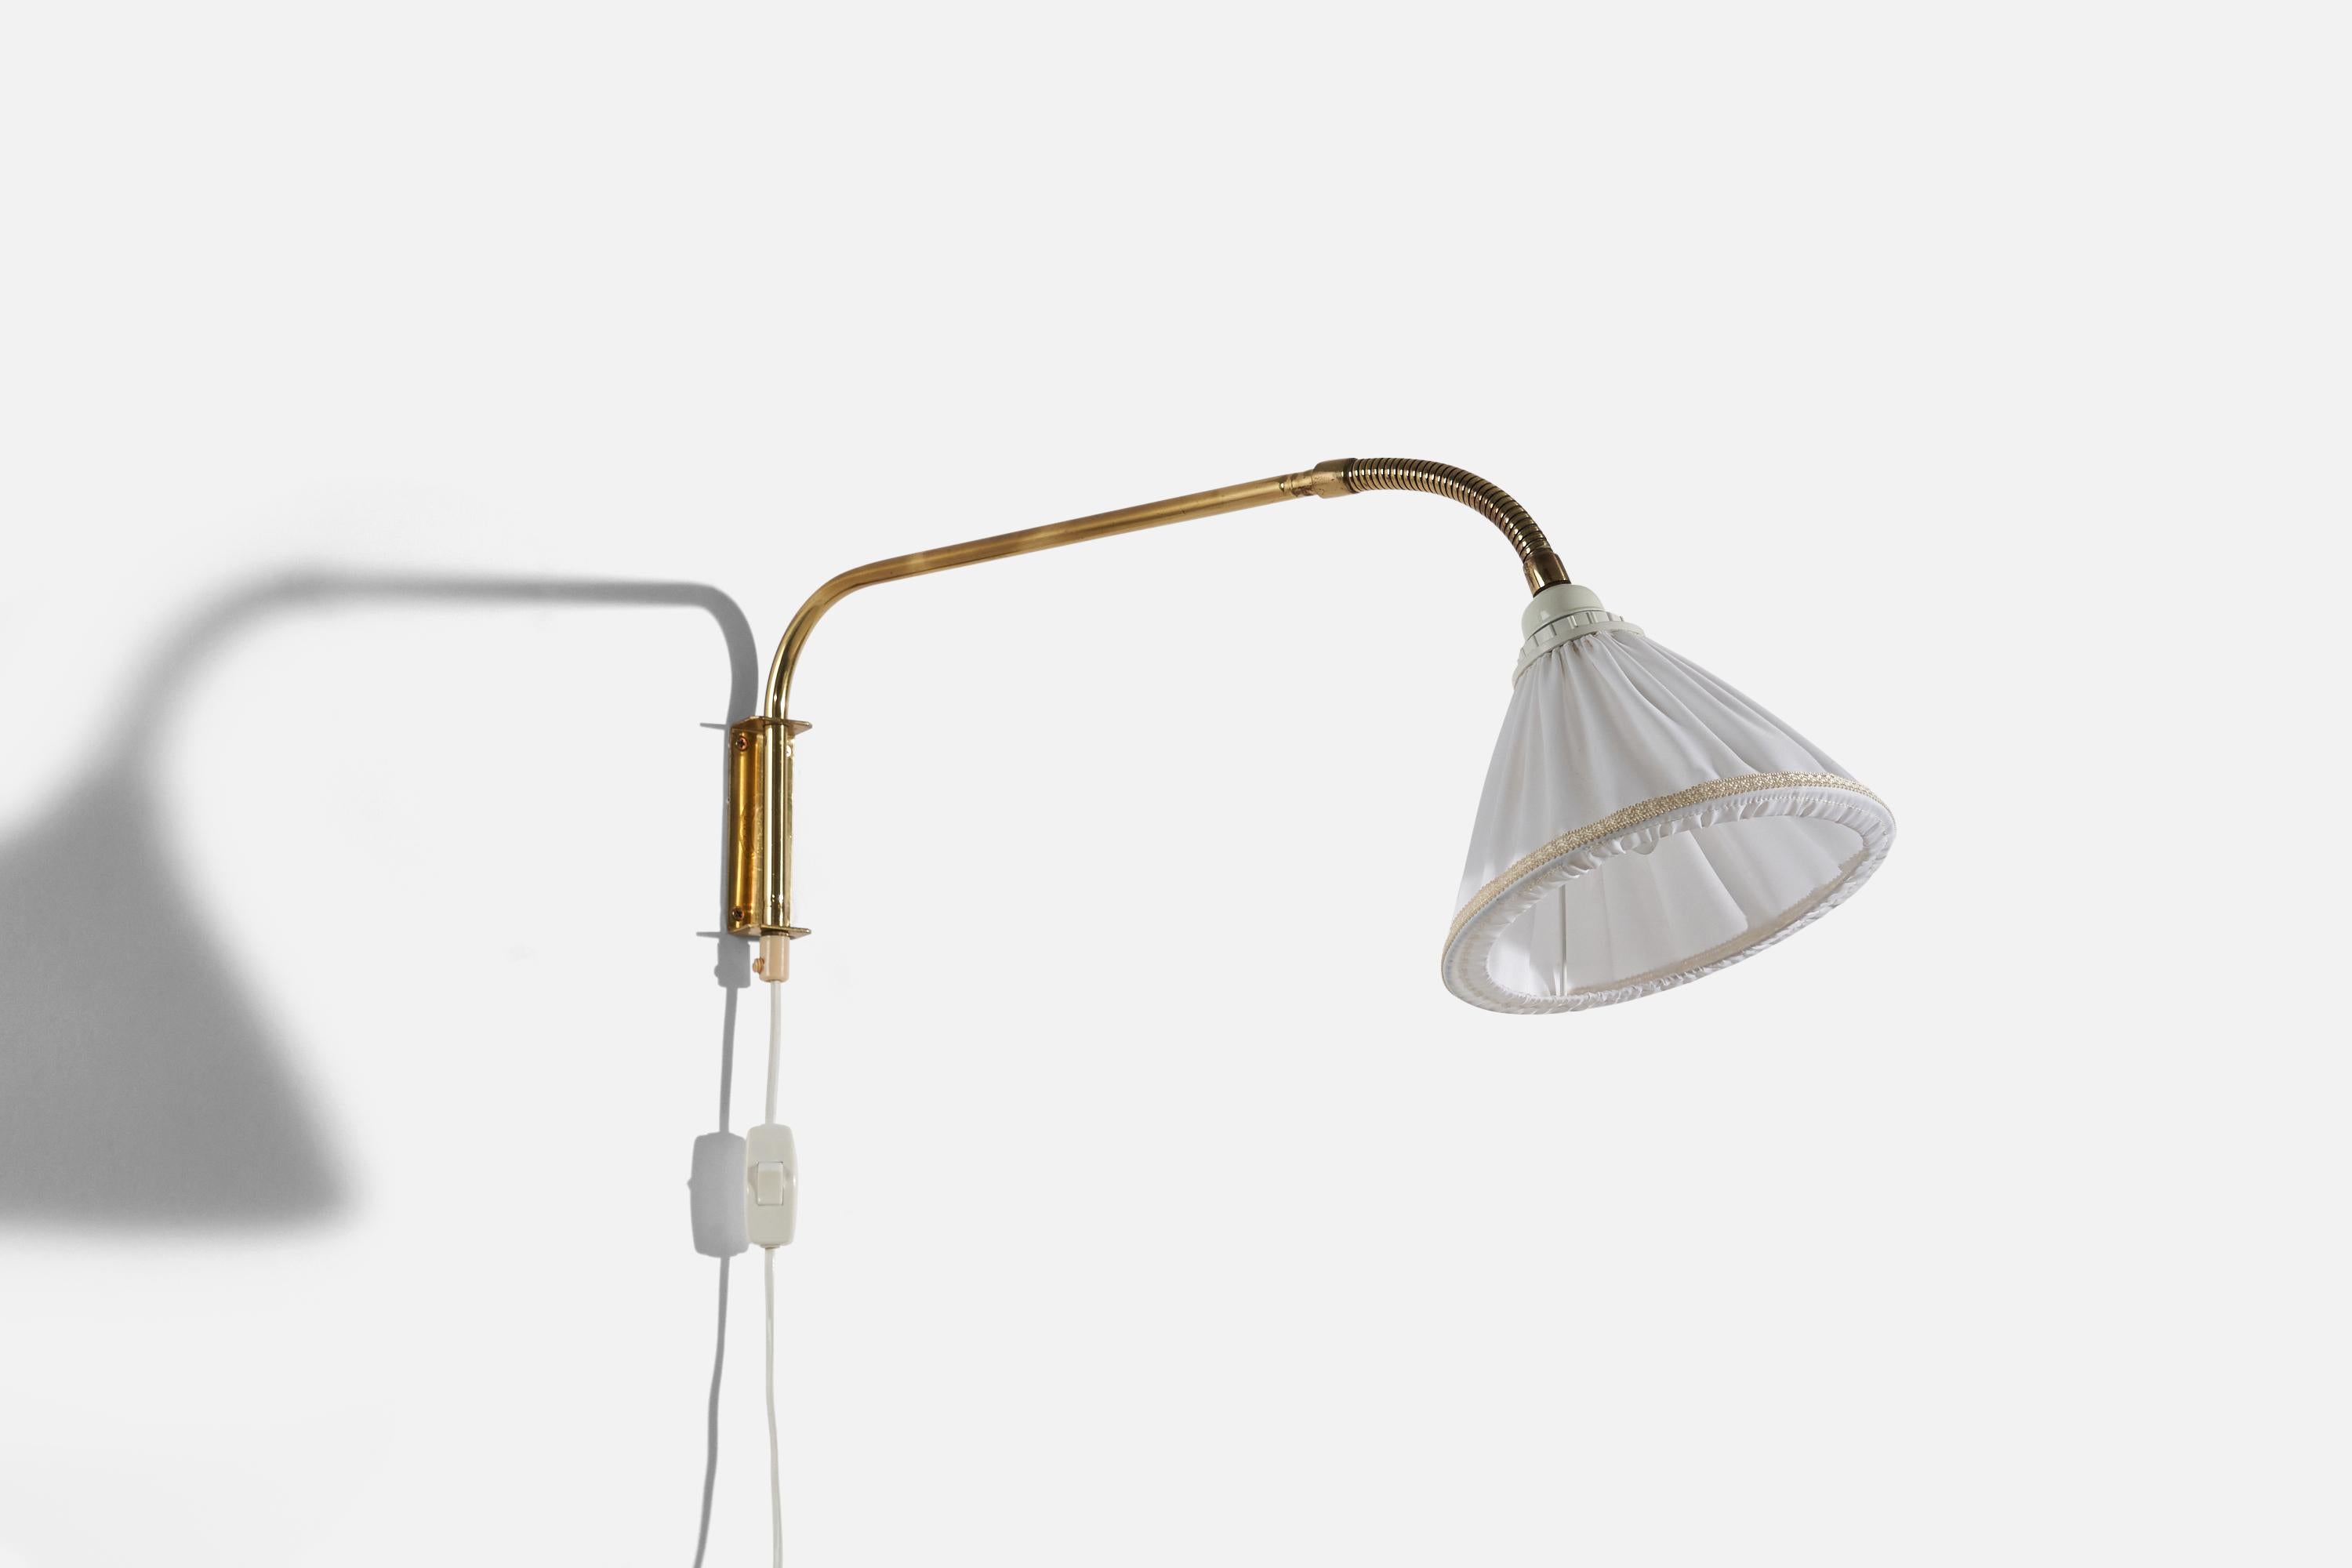 A brass and fabric wall light designed and produced in Sweden, c. 1940s.

Variable dimensions, measured as illustrated in the first image. 

Dimensions of back plate (inches) : 4.125 x 1.375 x 1.0625 (H x W x D).